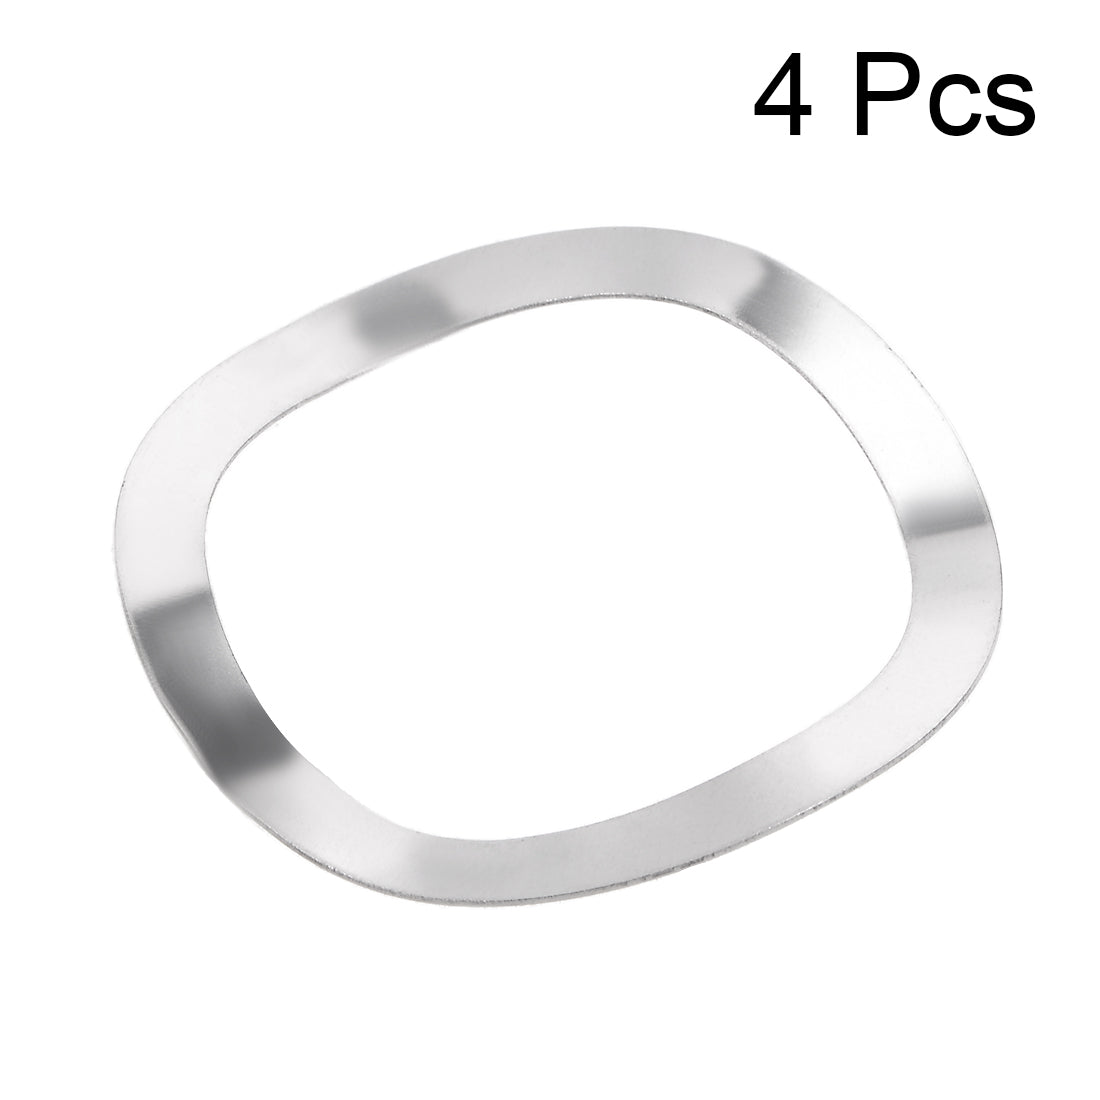 uxcell Uxcell 4Pcs 304 Stainless Steel Wave Crinkle Spring Washer